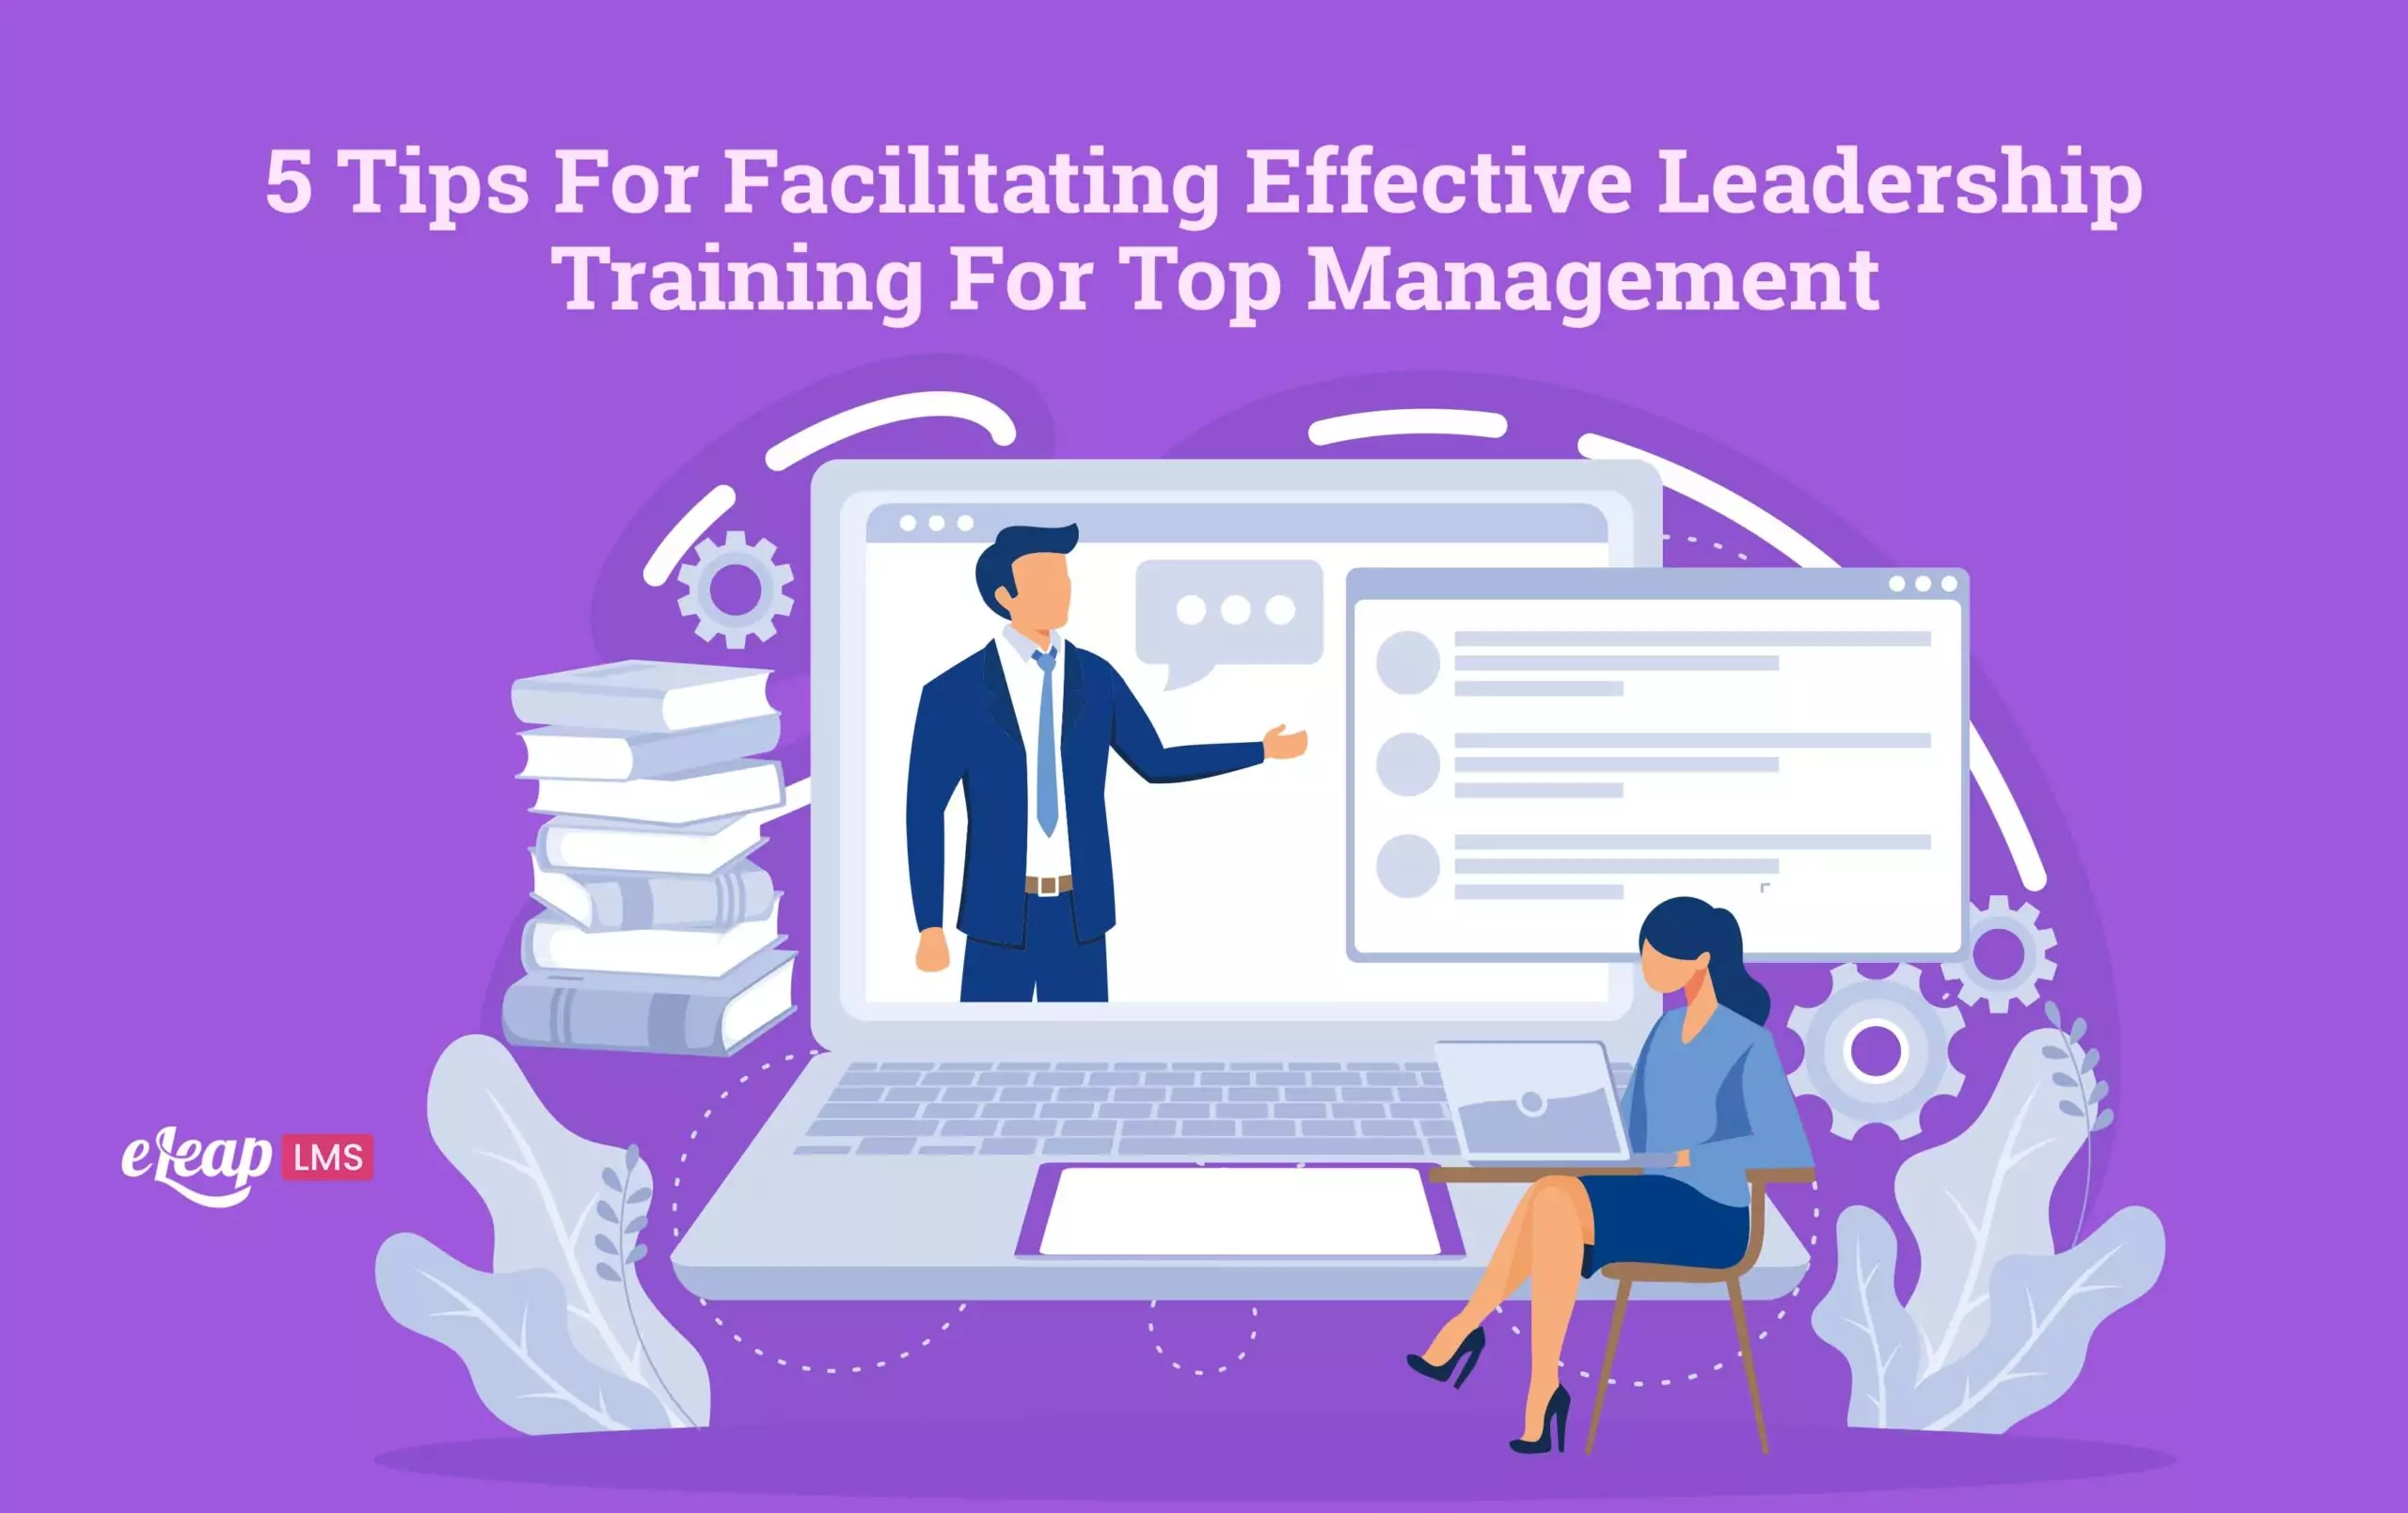 Leadership Training For Top Management